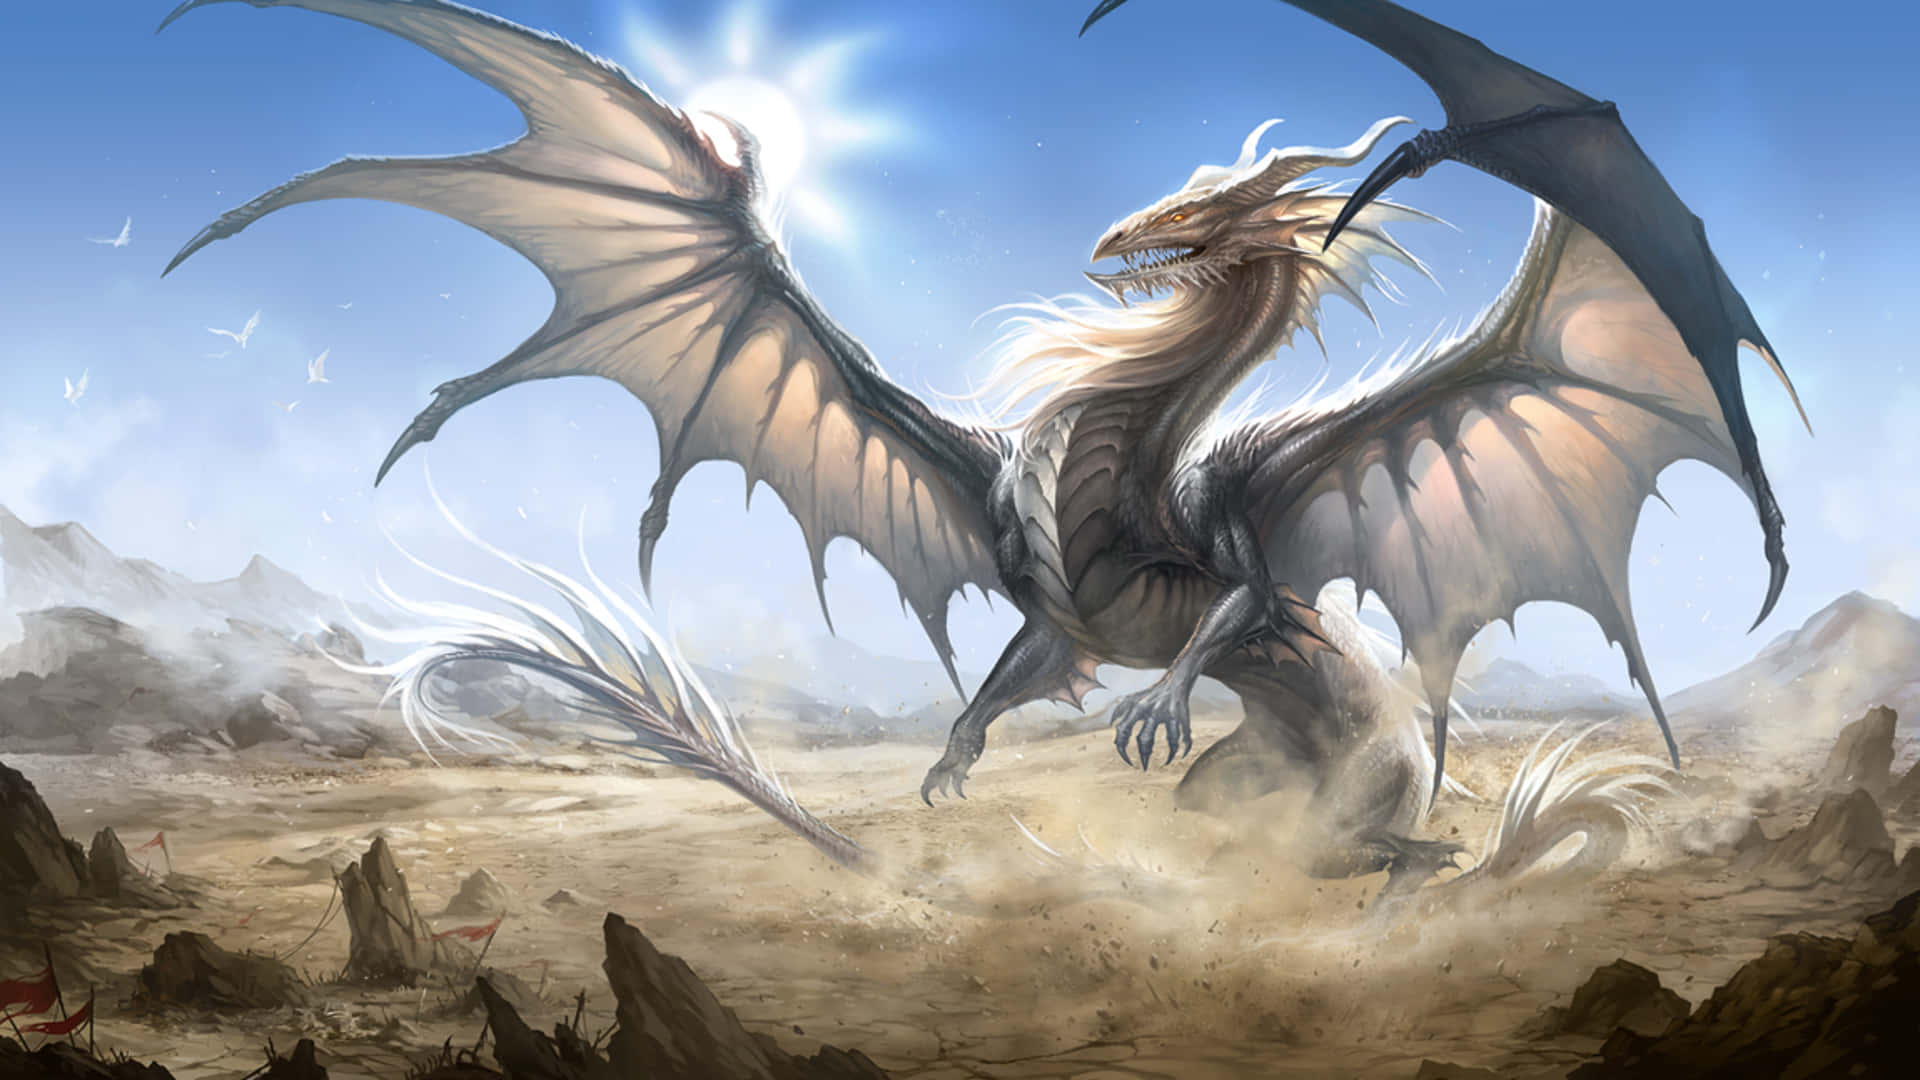 An awesome dragon flying through the night sky. Wallpaper